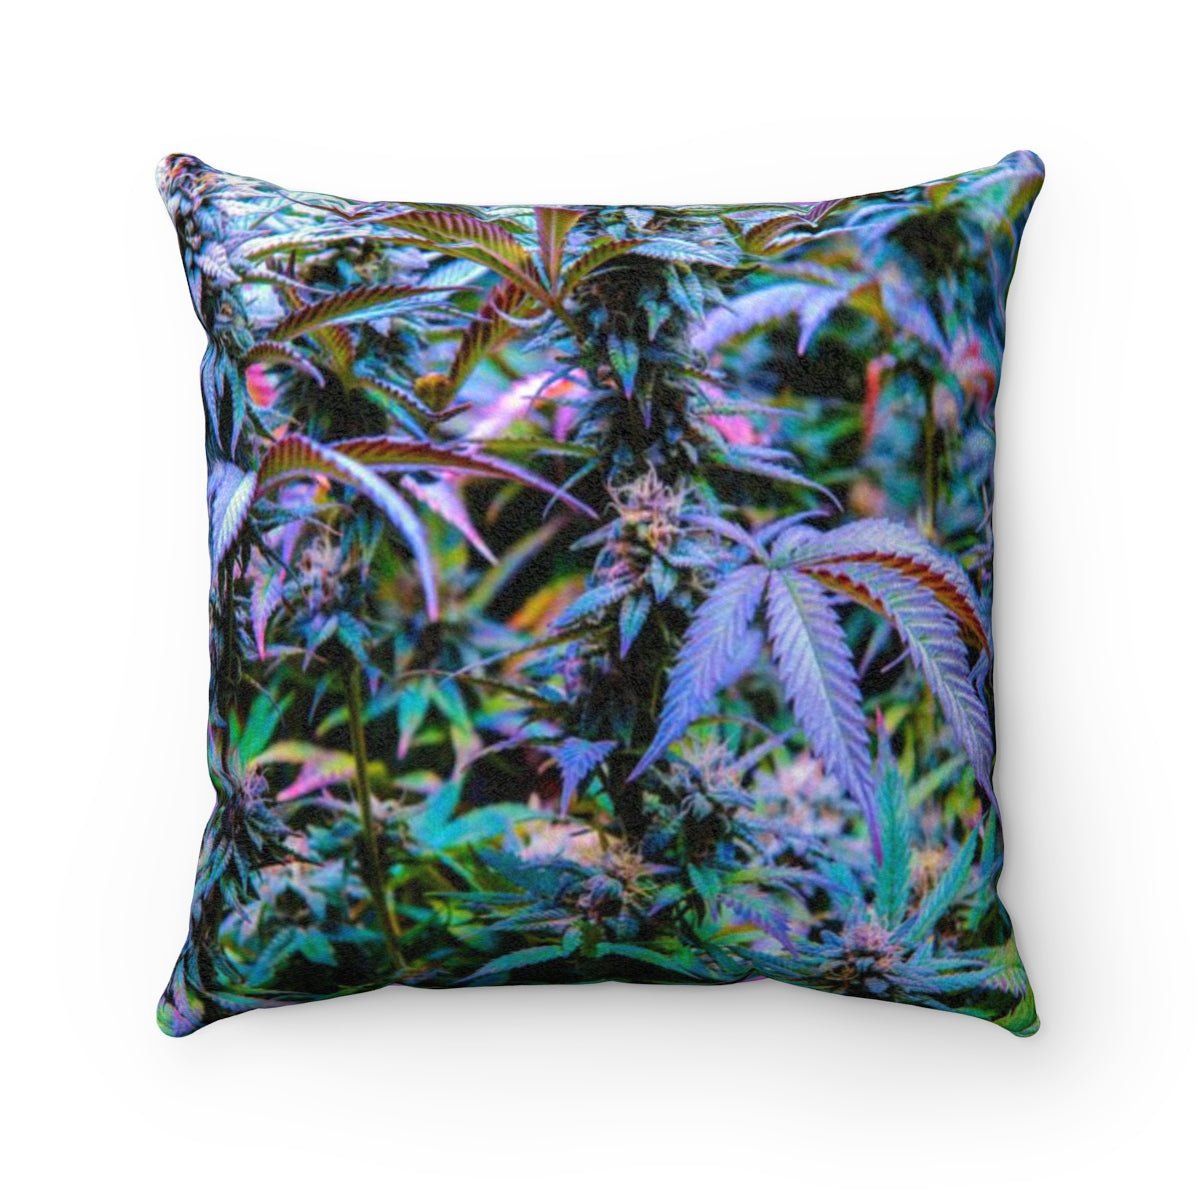 The Rainbow Cannabis Faux Suede Square Pillow